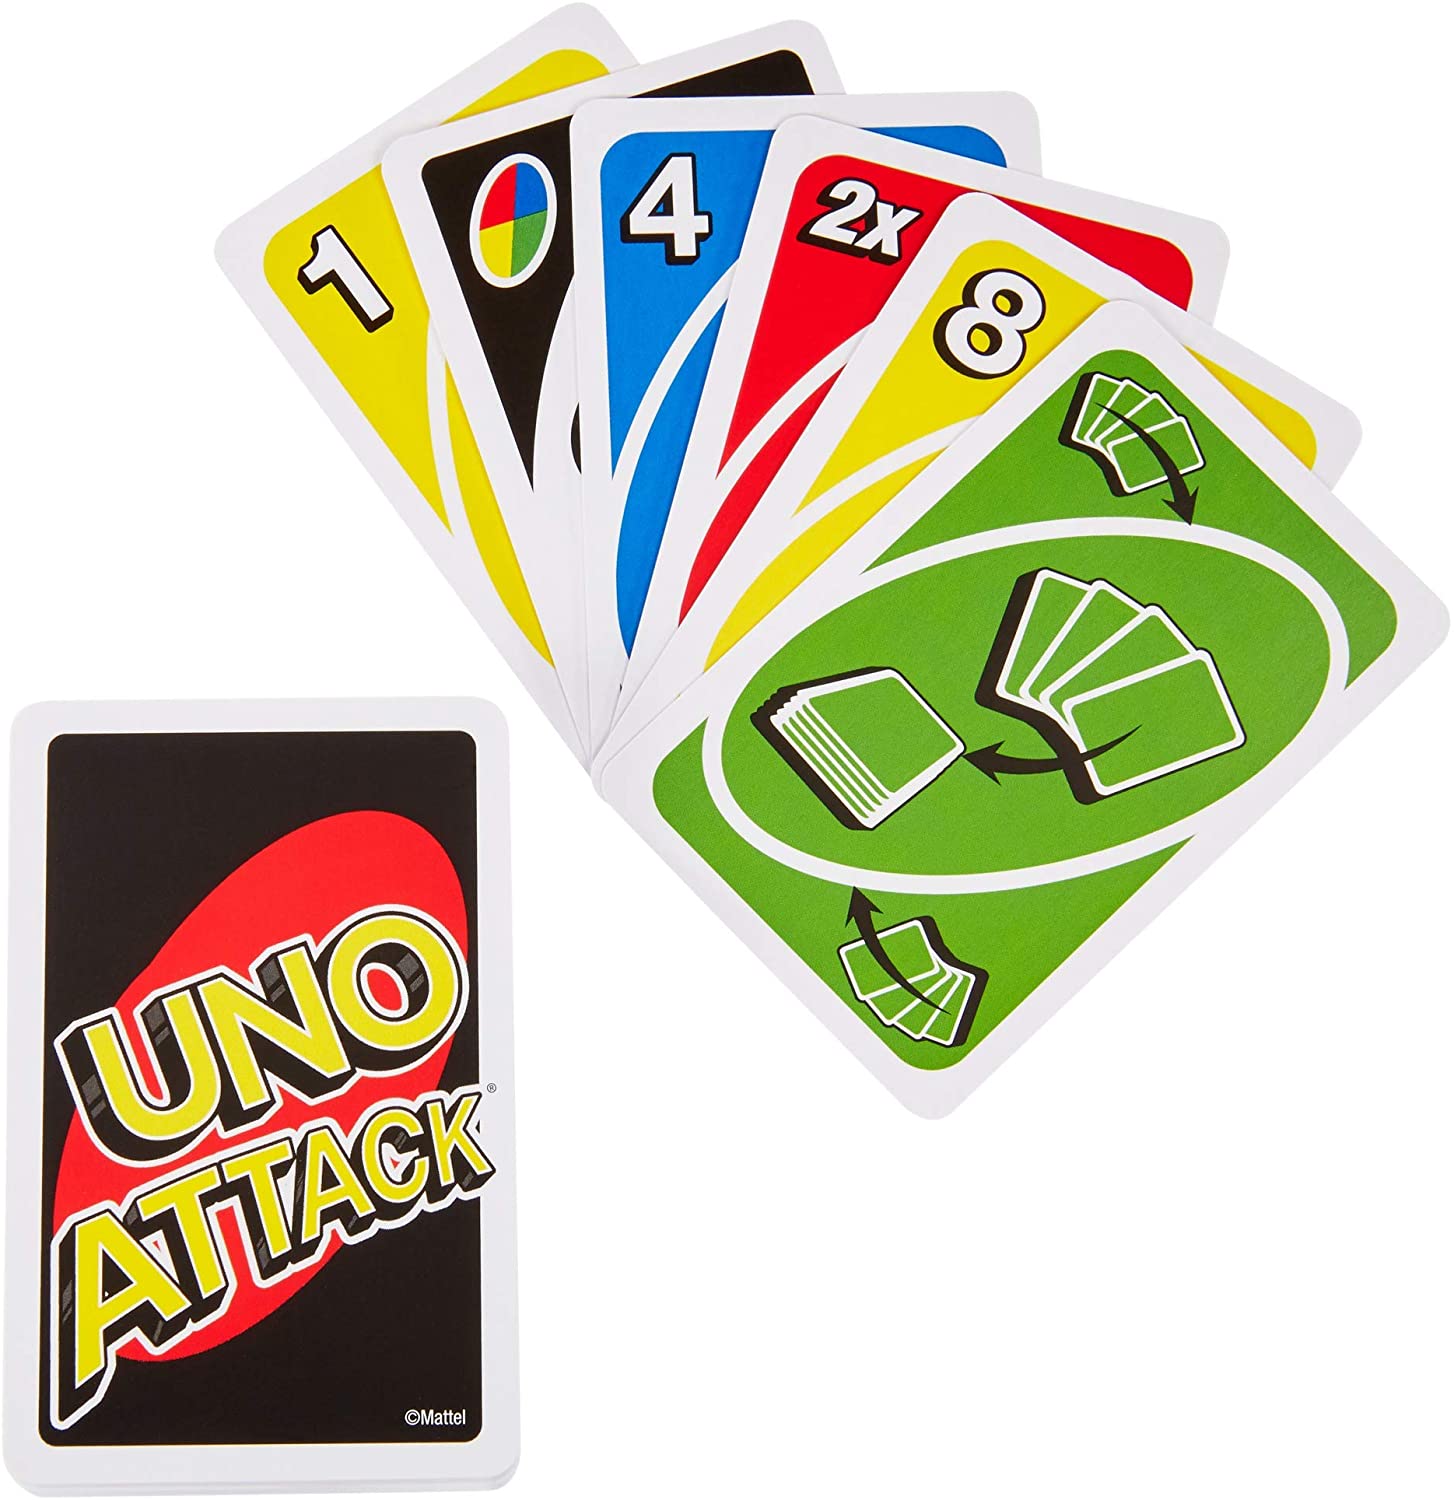 How to play UNO Attack!